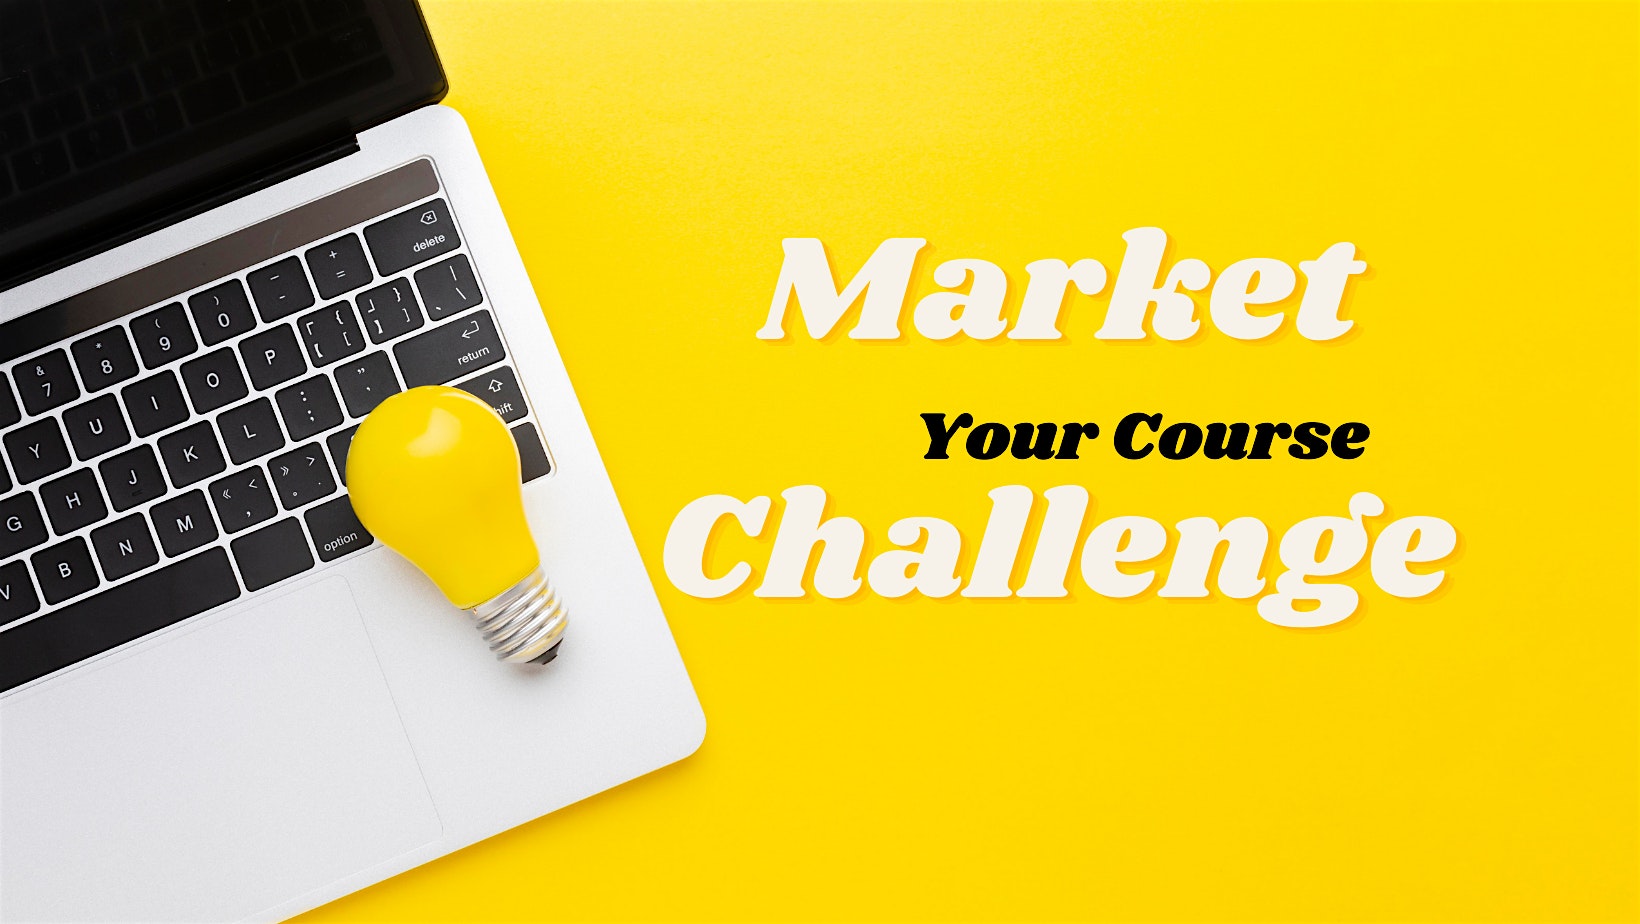 The Market Your Course 10-Day Challenge